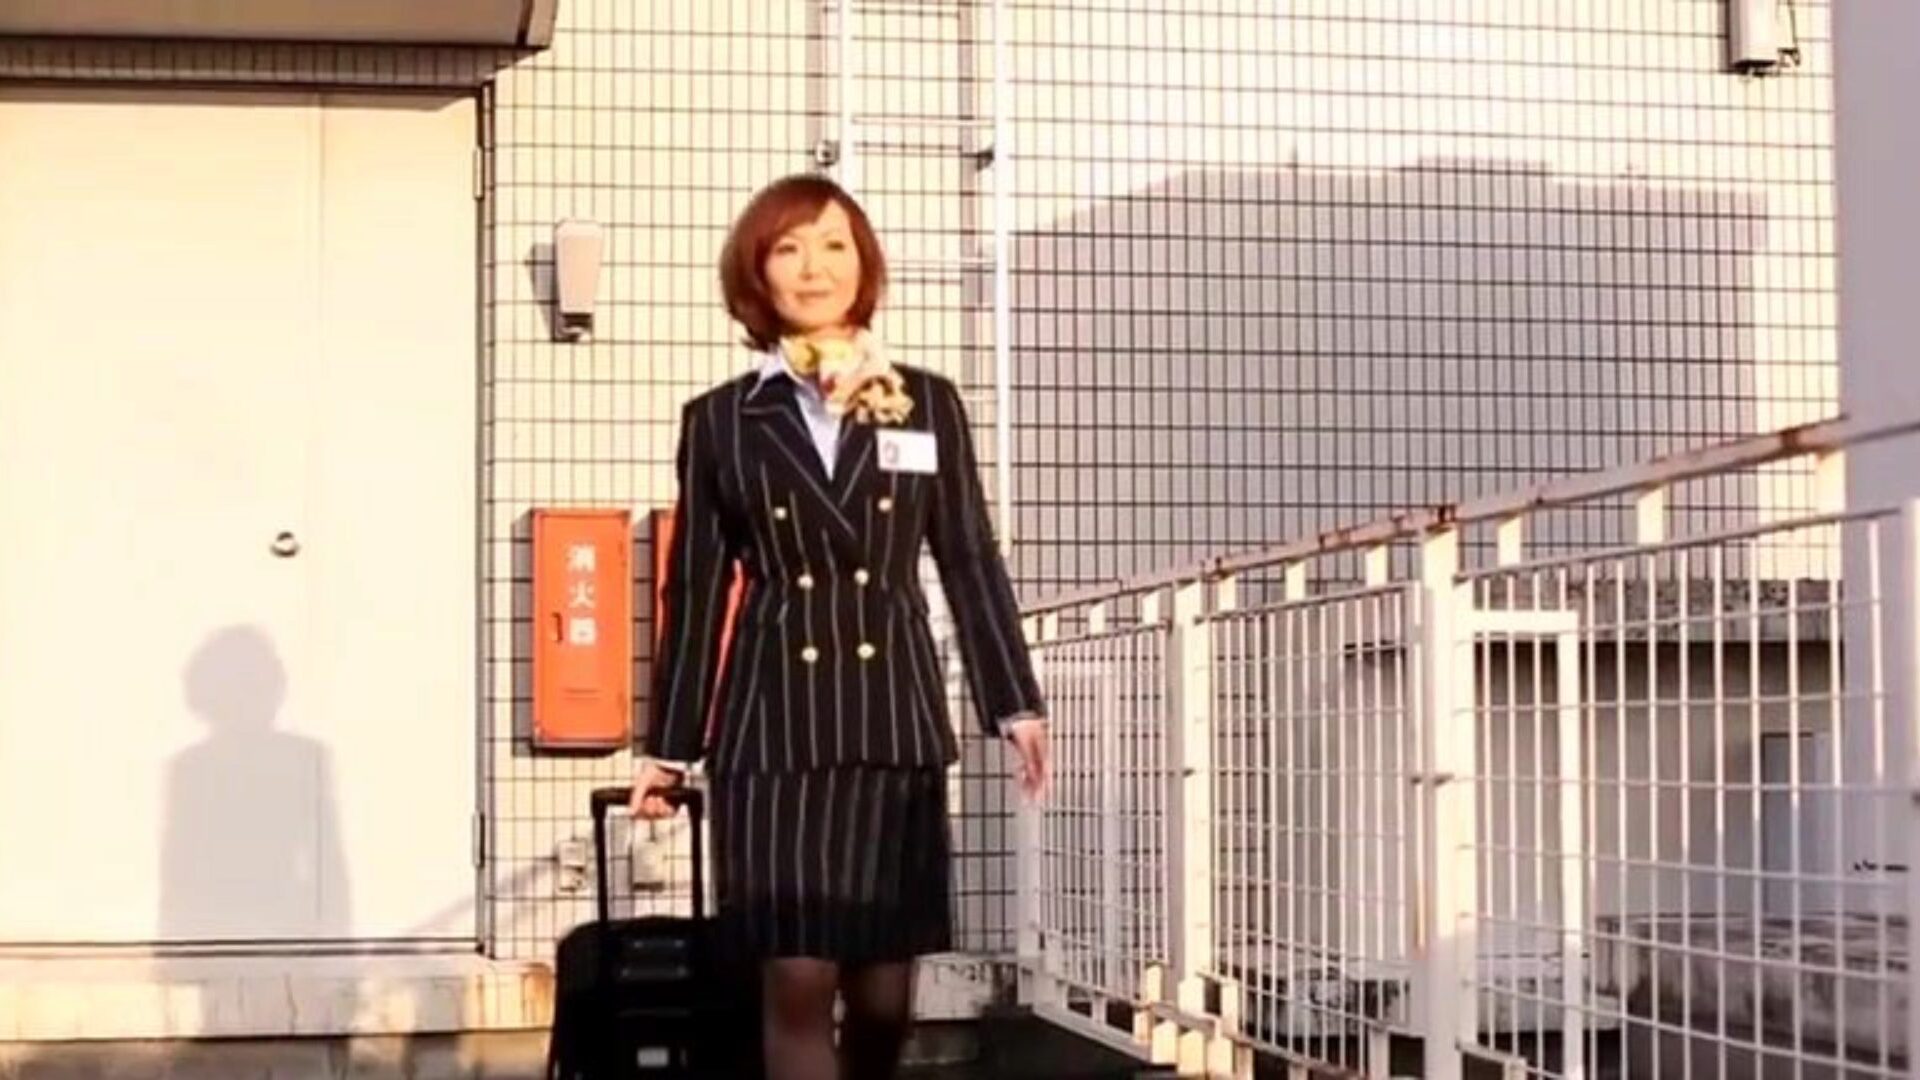 CFNM Japanese mom I'd like to bang Flight Attendant Pumped in Taut Butt